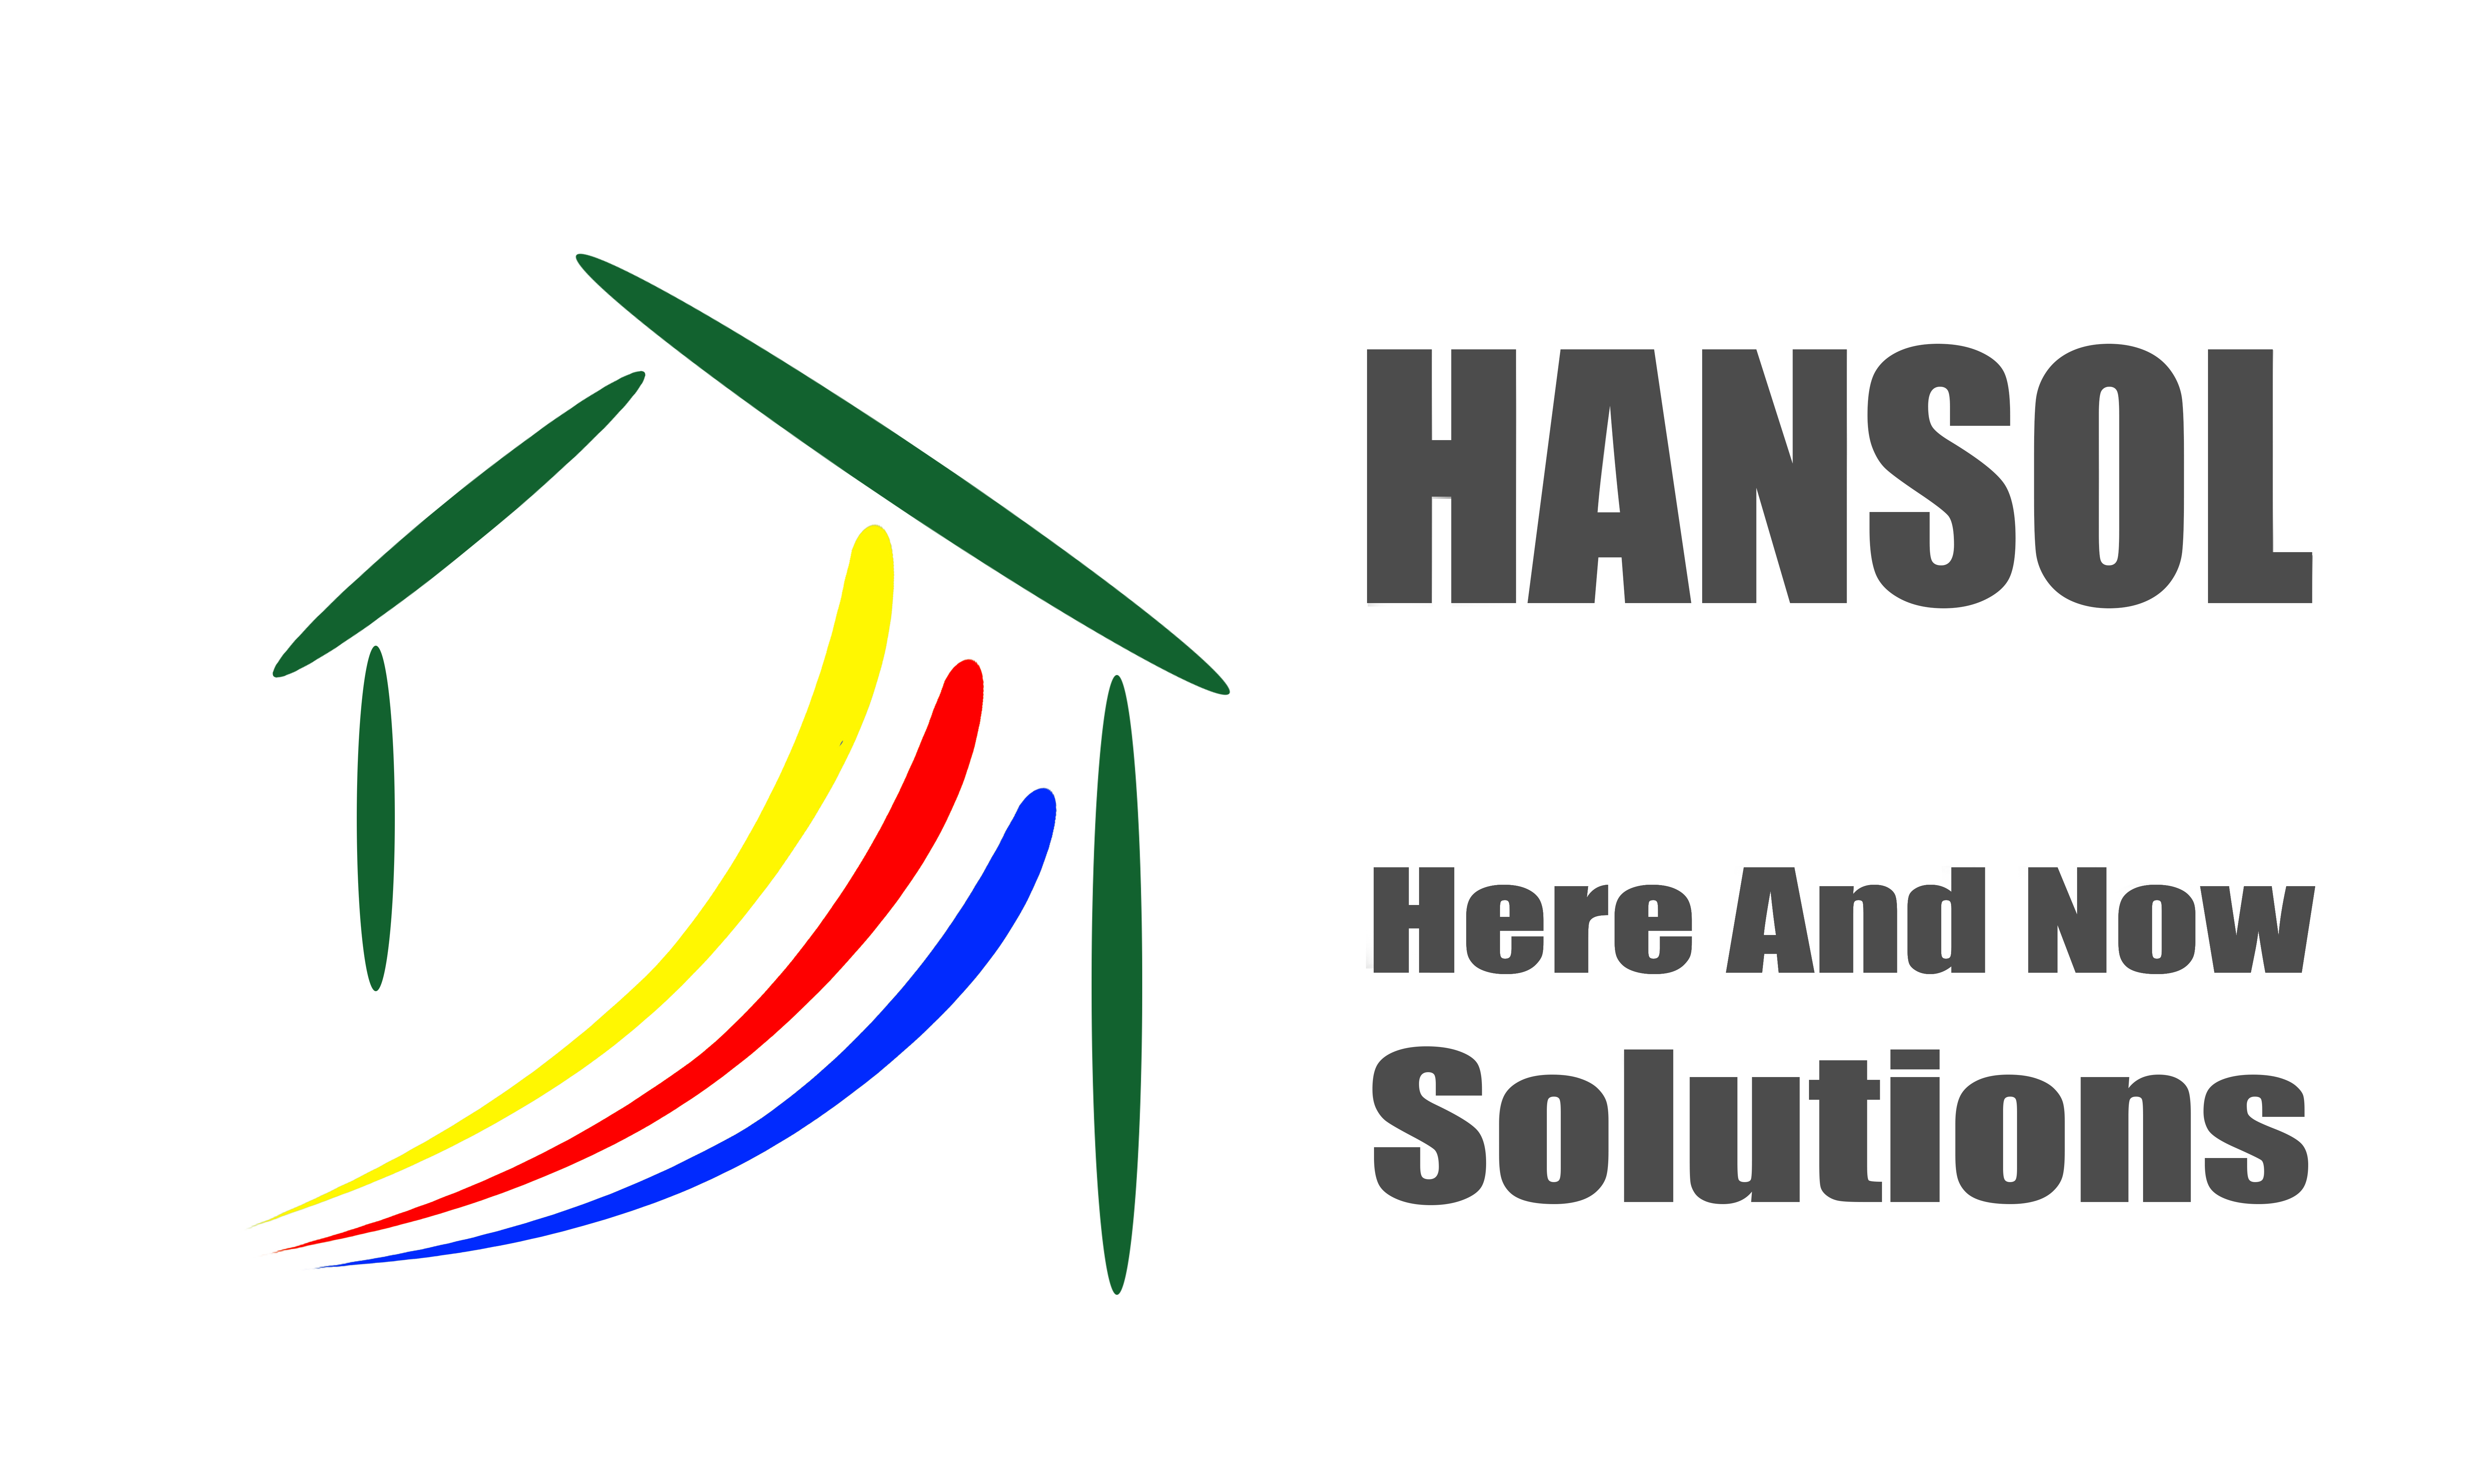 HANSOL - HERE AND NOW SOLUTIONS